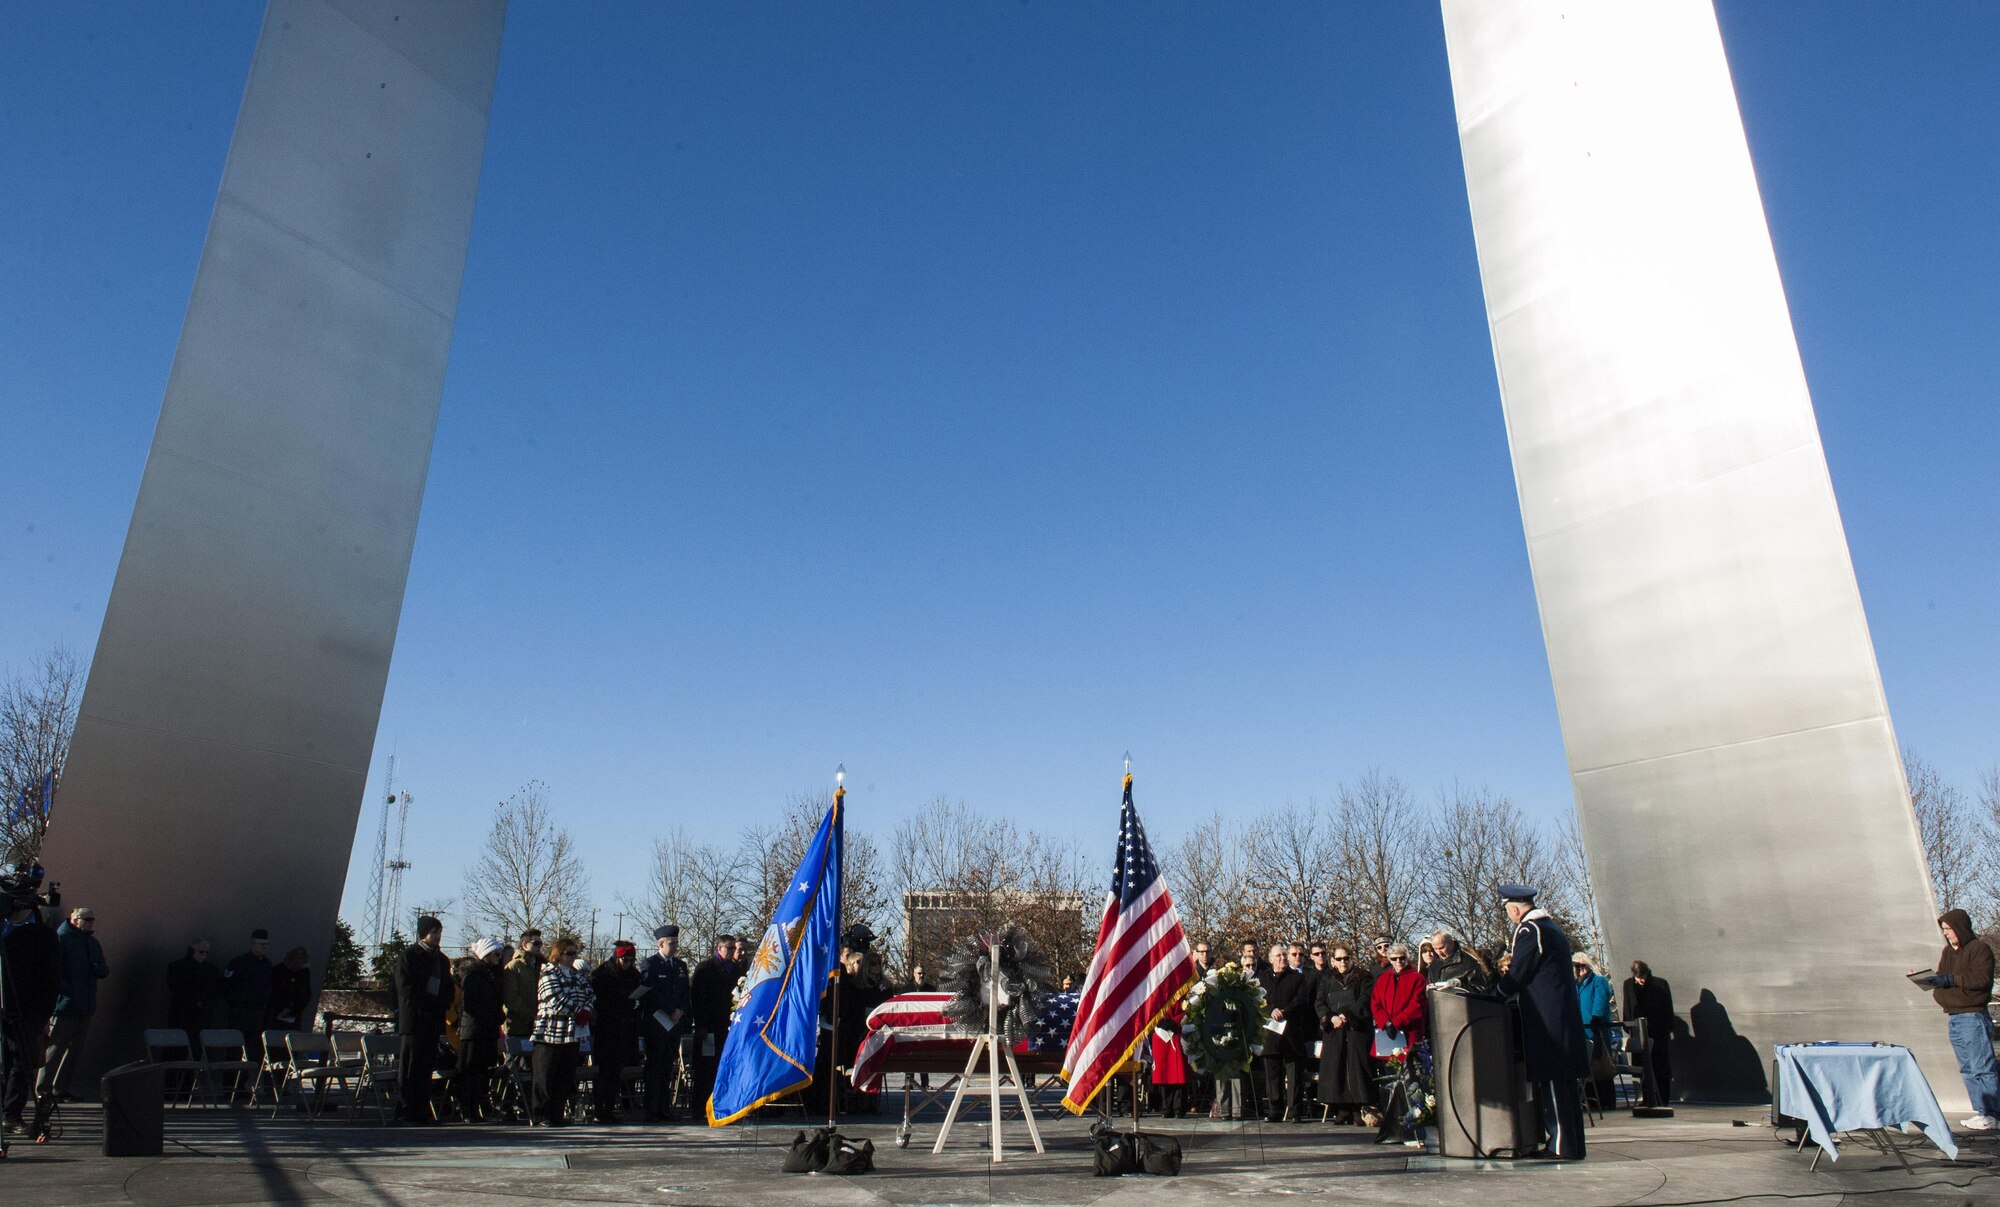 Family and friends of Col. Francis McGouldrick Jr. gather for a celebration of life ceremony Dec. 13, 2013, at the Air Force Memorial, in Arlington, Va. McGouldrick Jr. was declared missing in action during his service in Laos following a mid-air collision while serving as the navigator on a B-57 Canberra on Dec. 13, 1968. (U.S. Air Force photo/Staff Sgt. Carlin Leslie)
